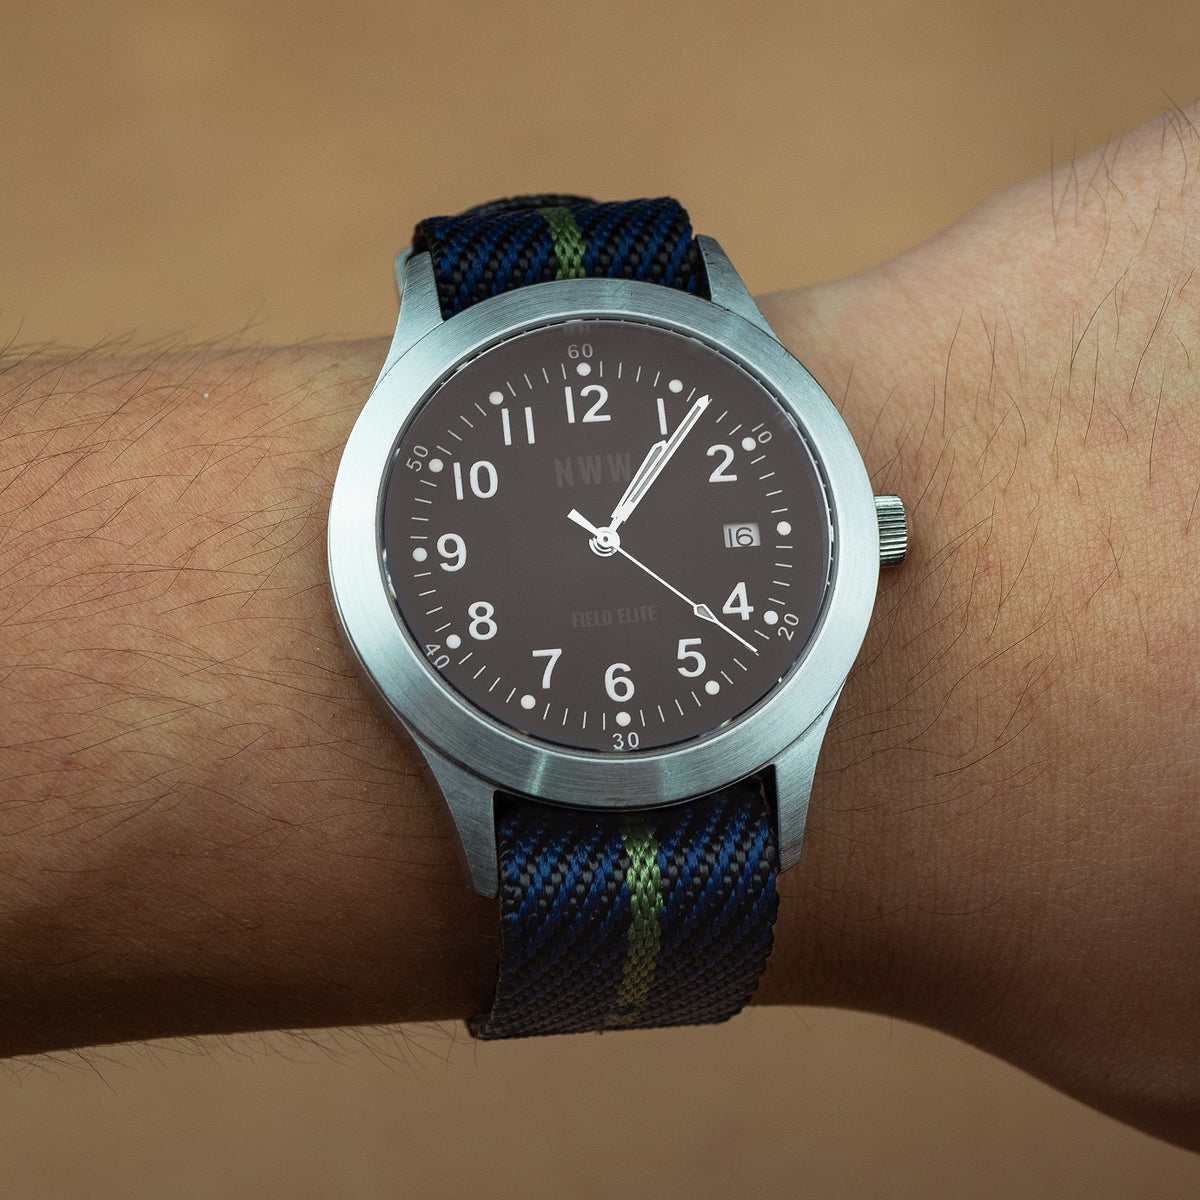 Lux Single Pass Strap in Navy Green with Silver Buckle (20mm) - Nomad watch Works